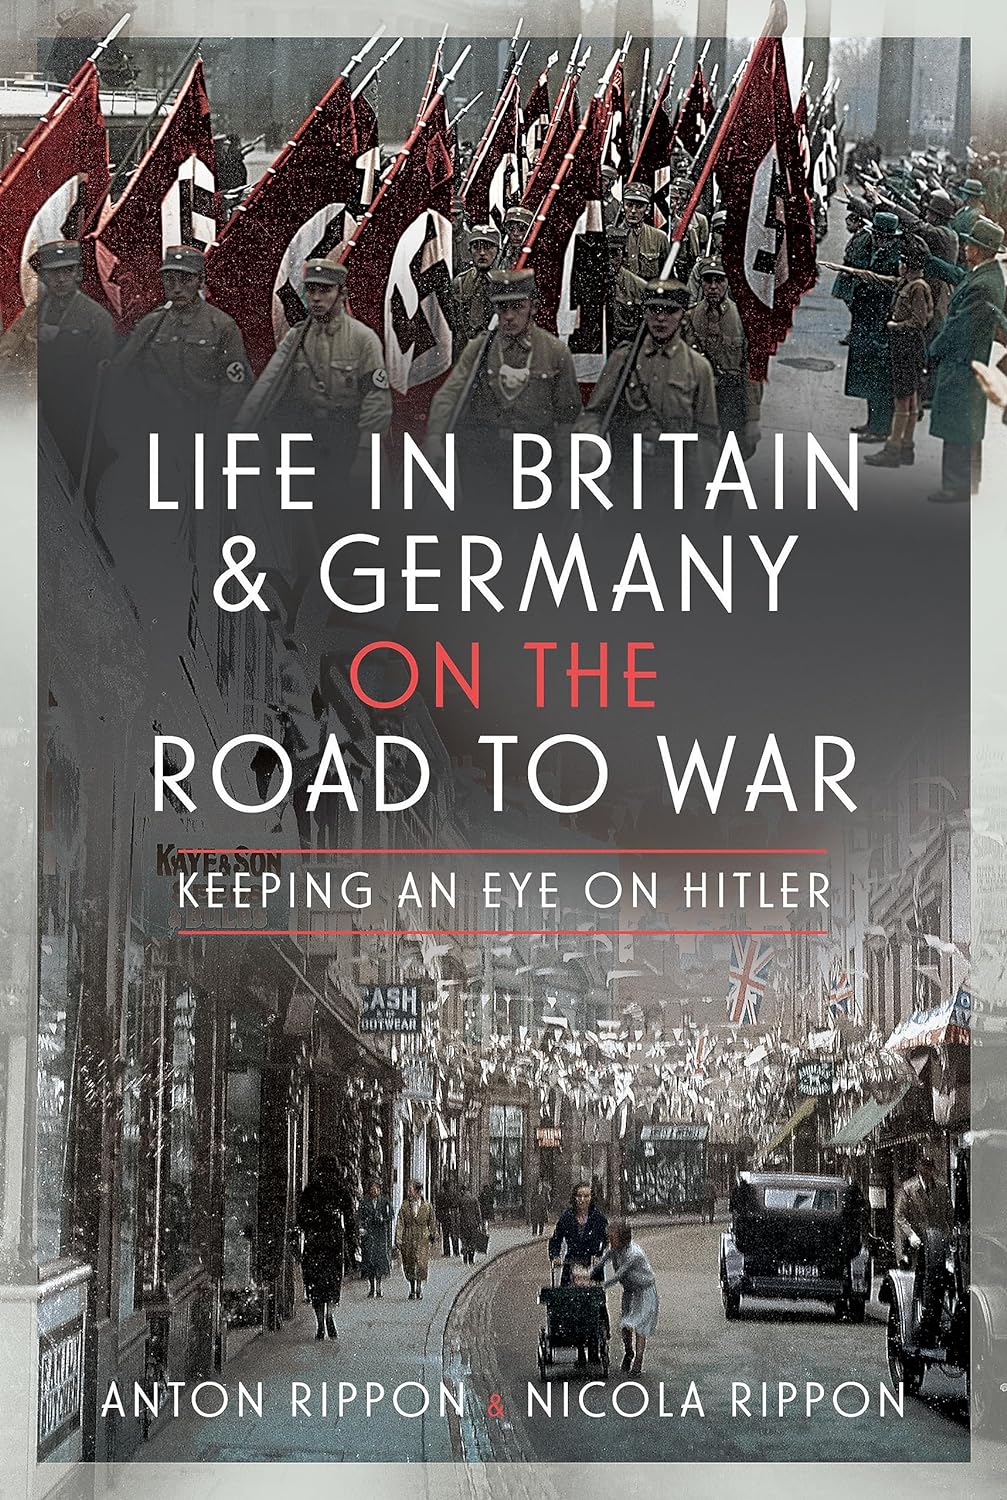 Life in Britain and Germany on the Road to War